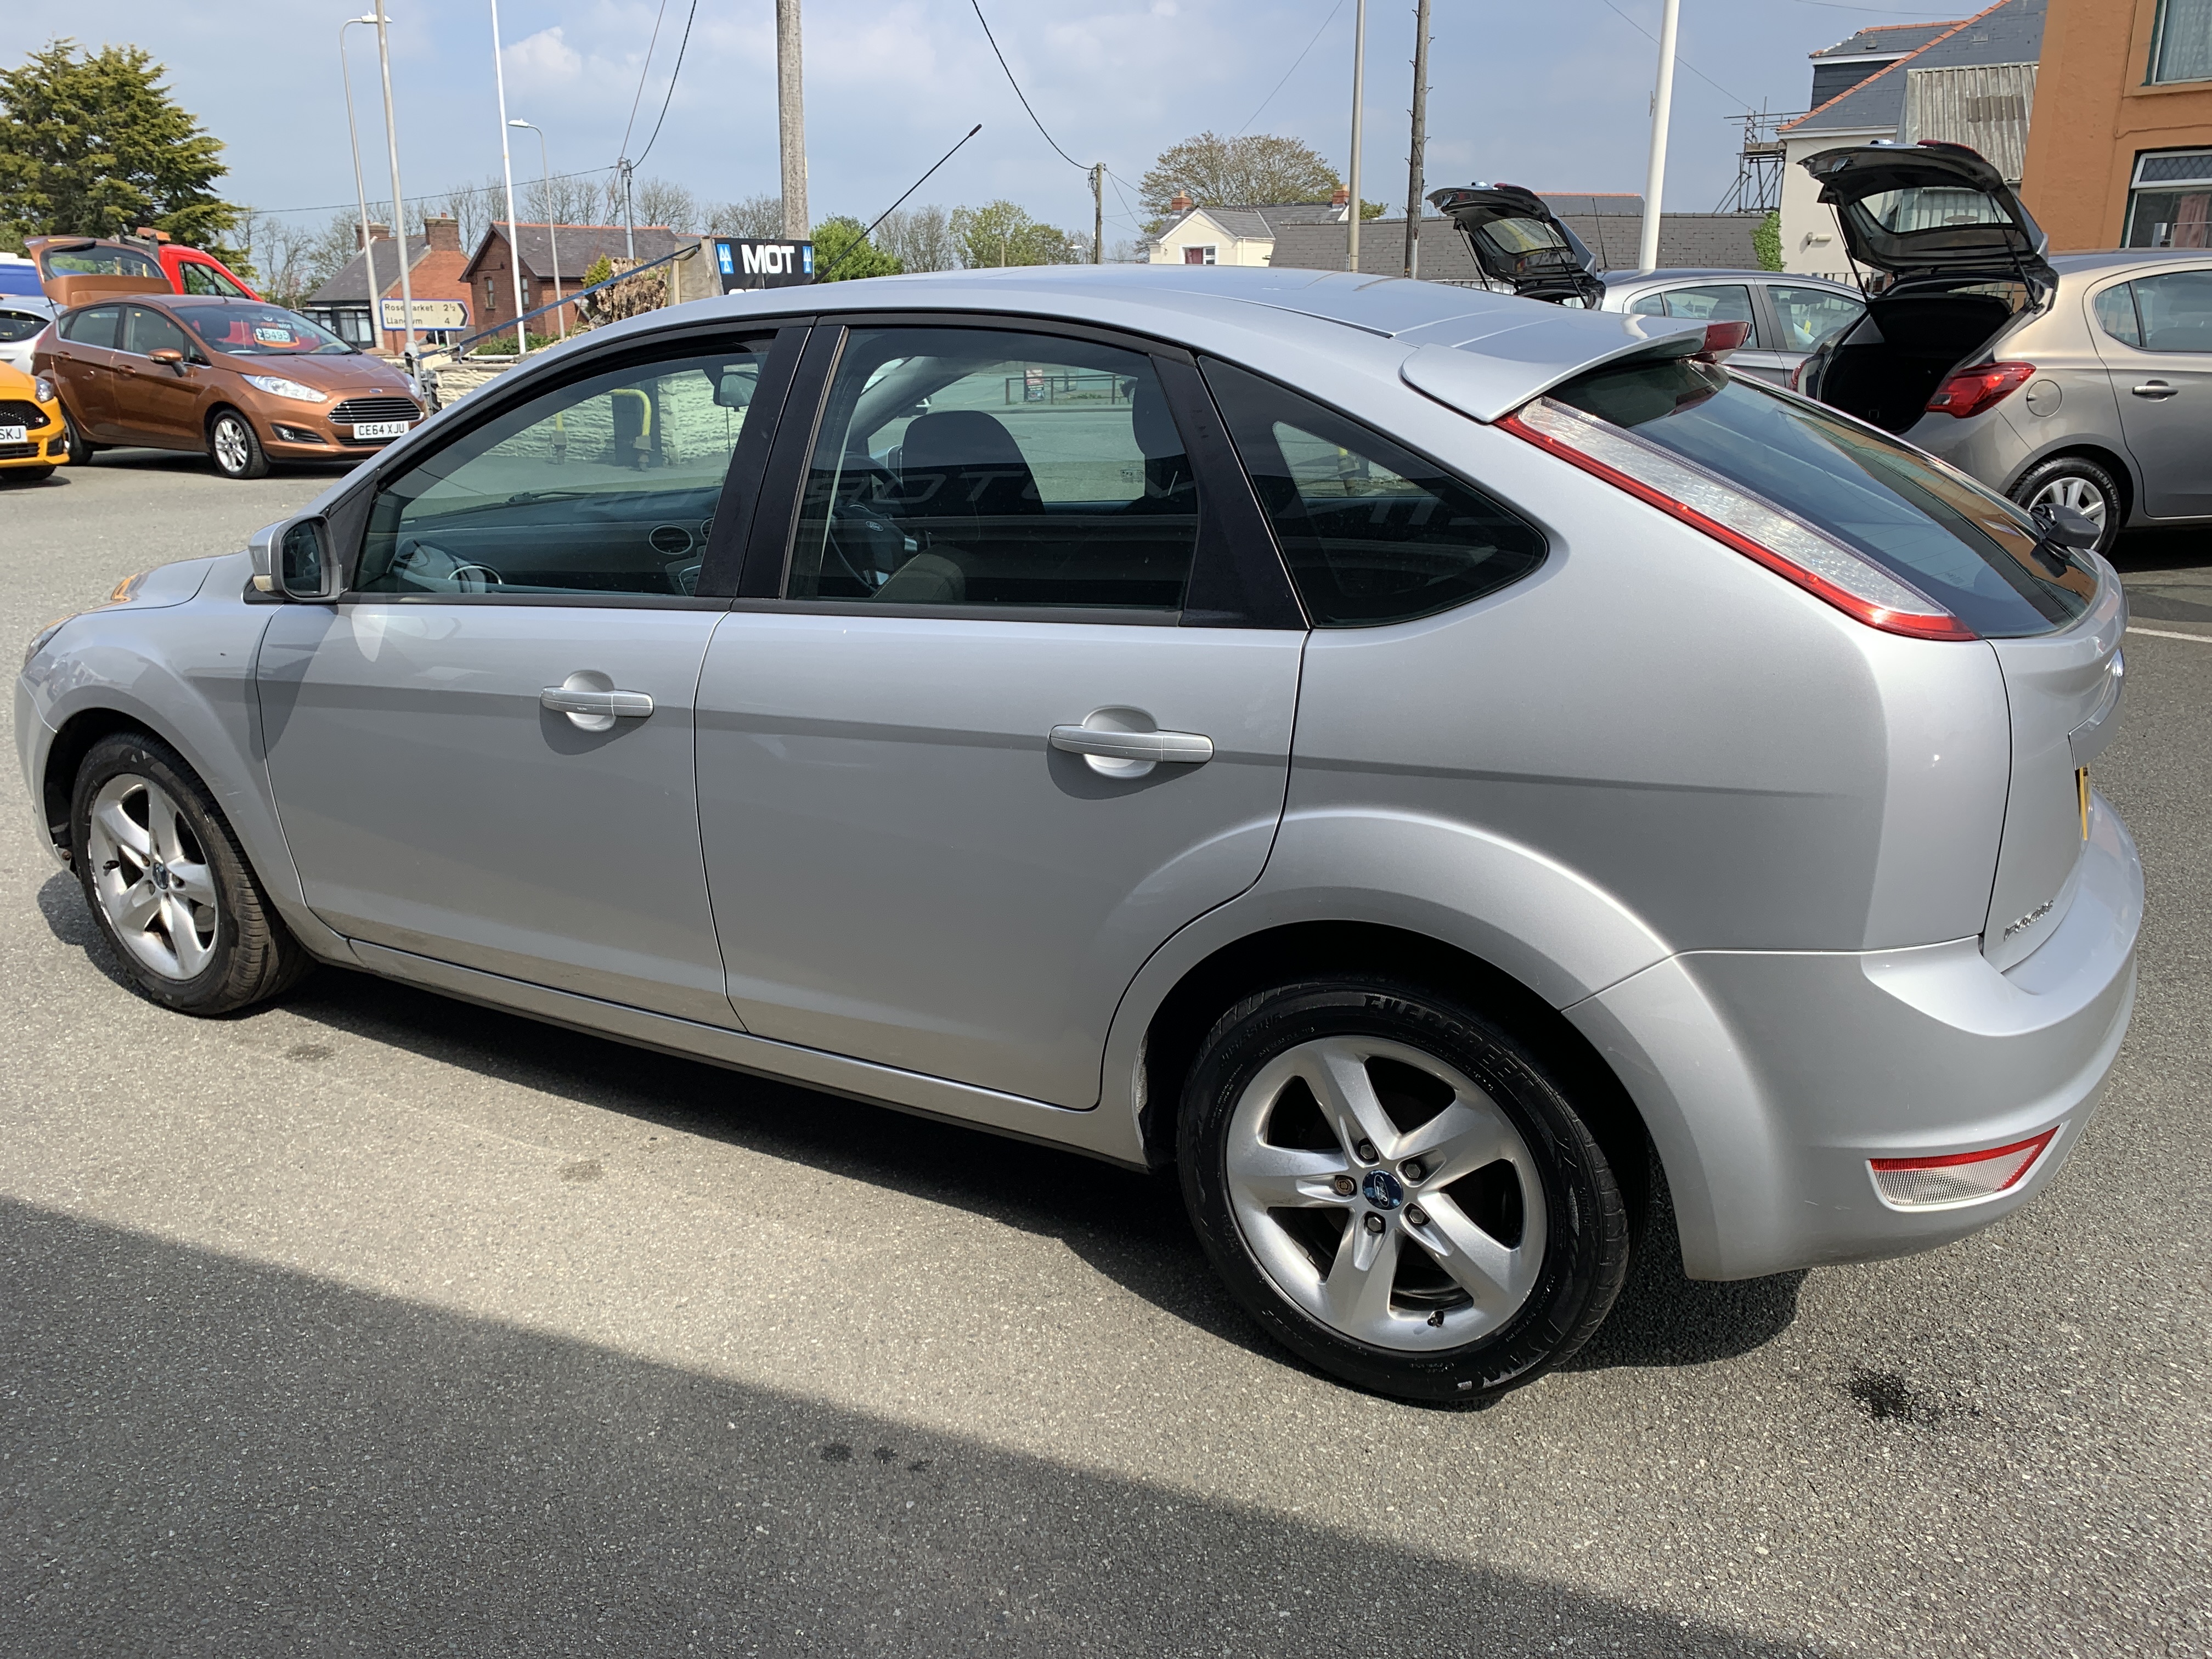 Ford FOCUS ZETEC 100 for sale at Mike Howlin Motor Sales Pembrokeshire